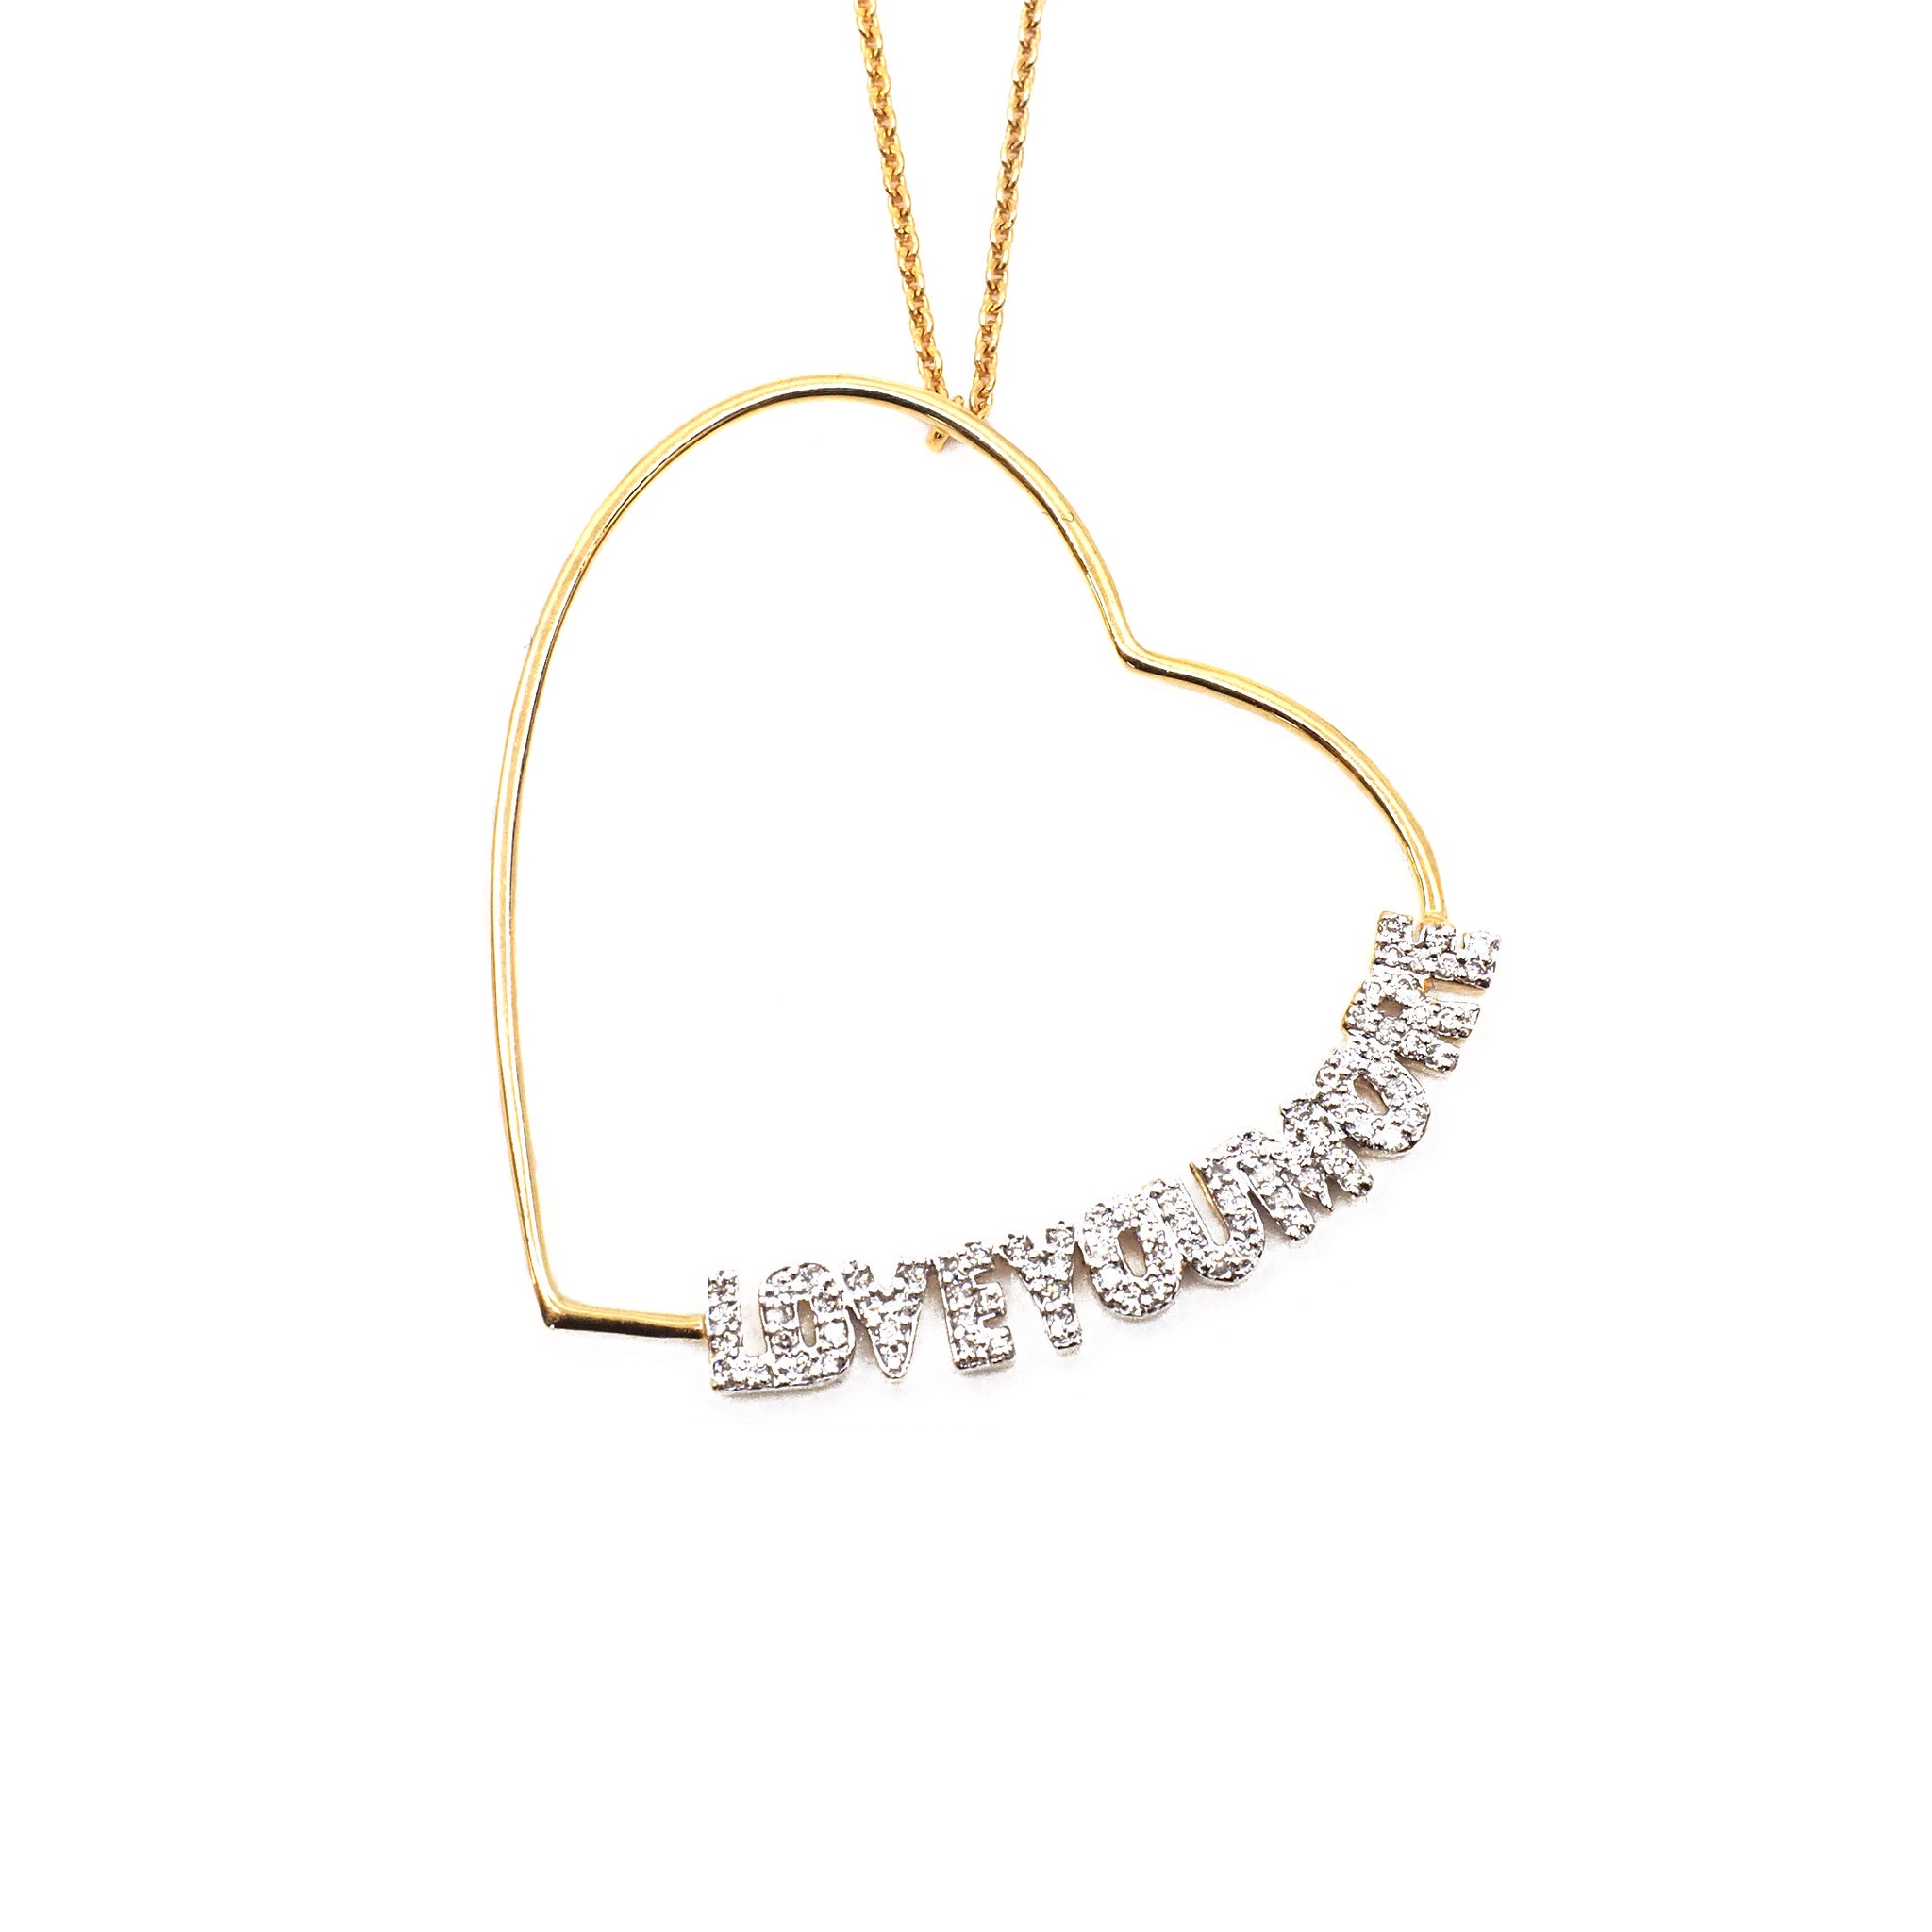 The Lucy Love Necklace in White Diamonds and Gold